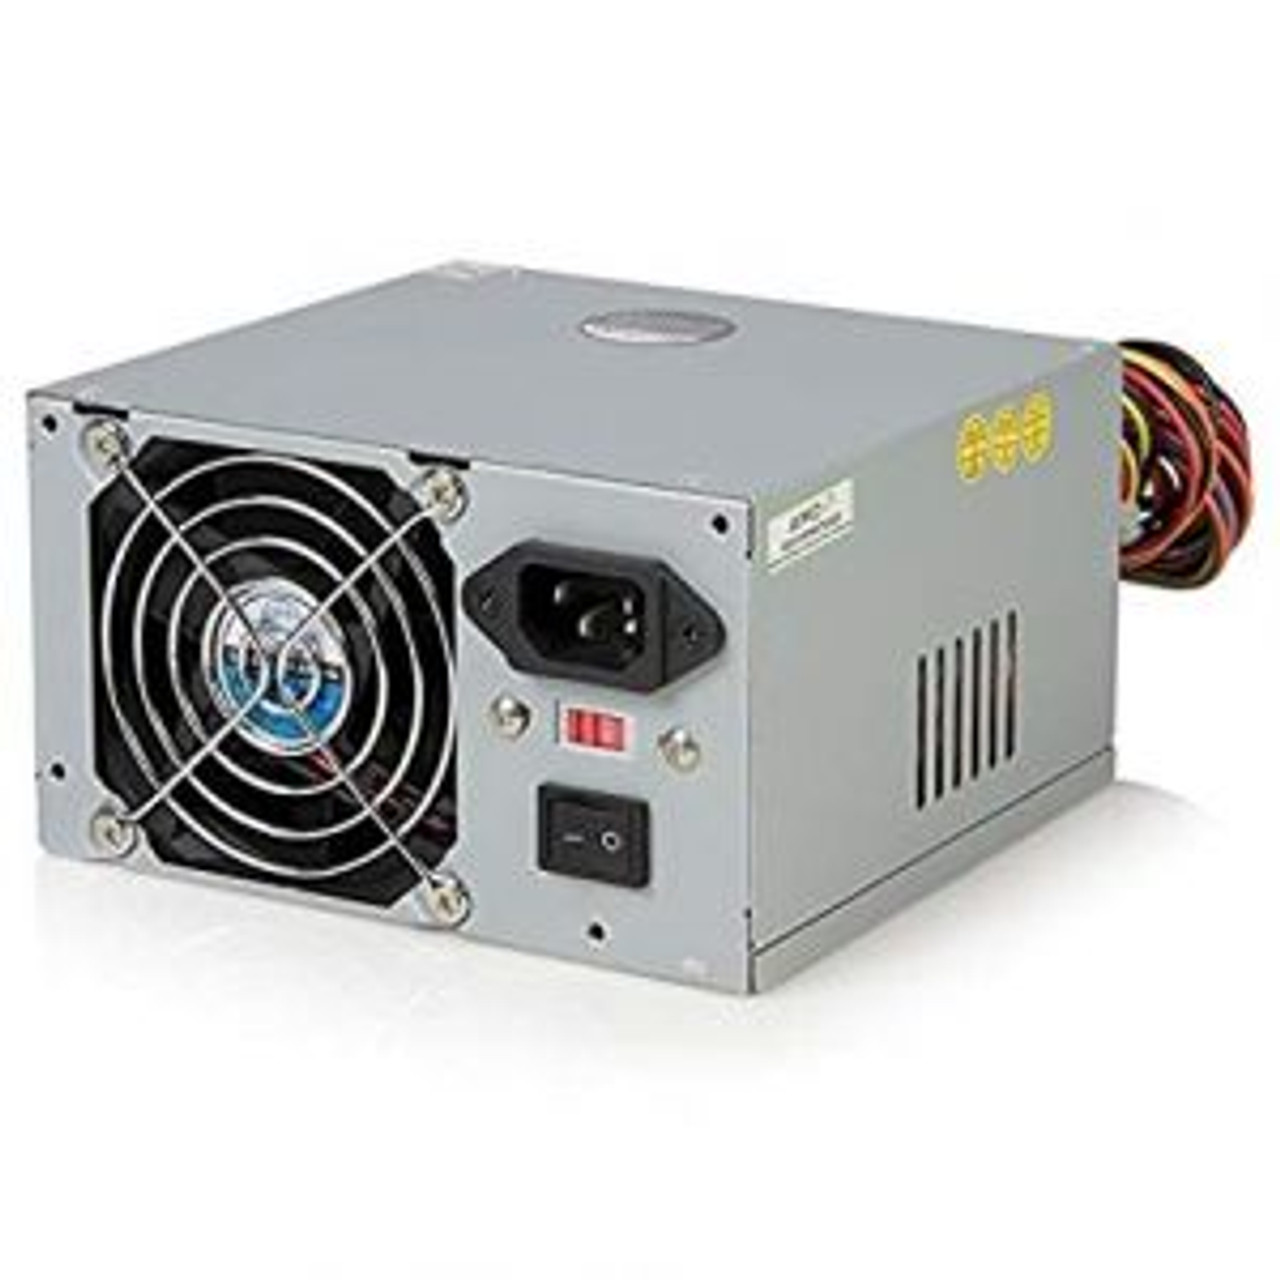 K61PK Dell 825-Watts Power Supply for Dell Precision To